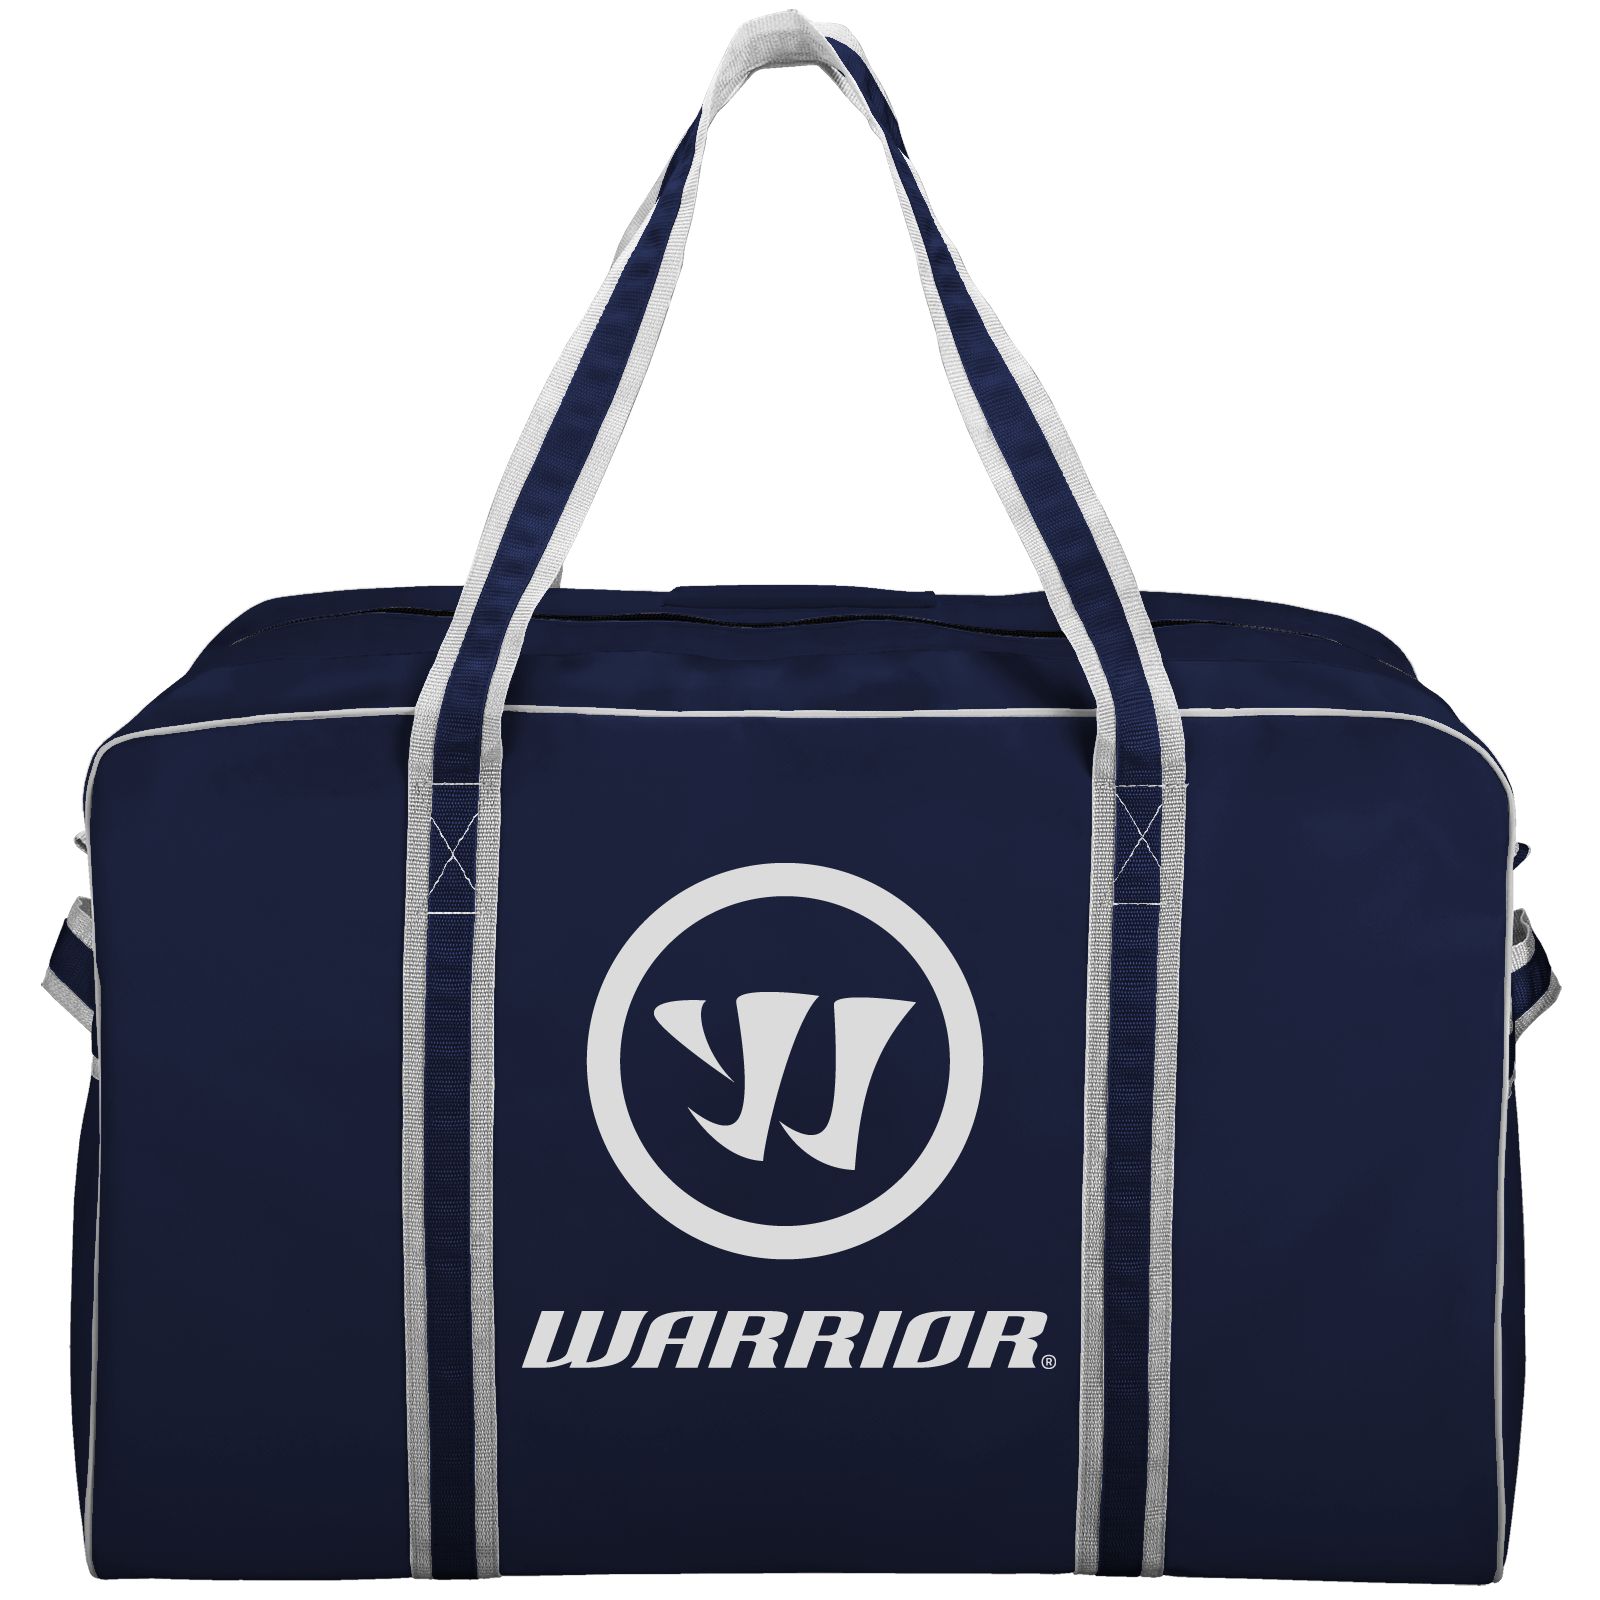 Warrior Pro Bag, Navy with White image number 0